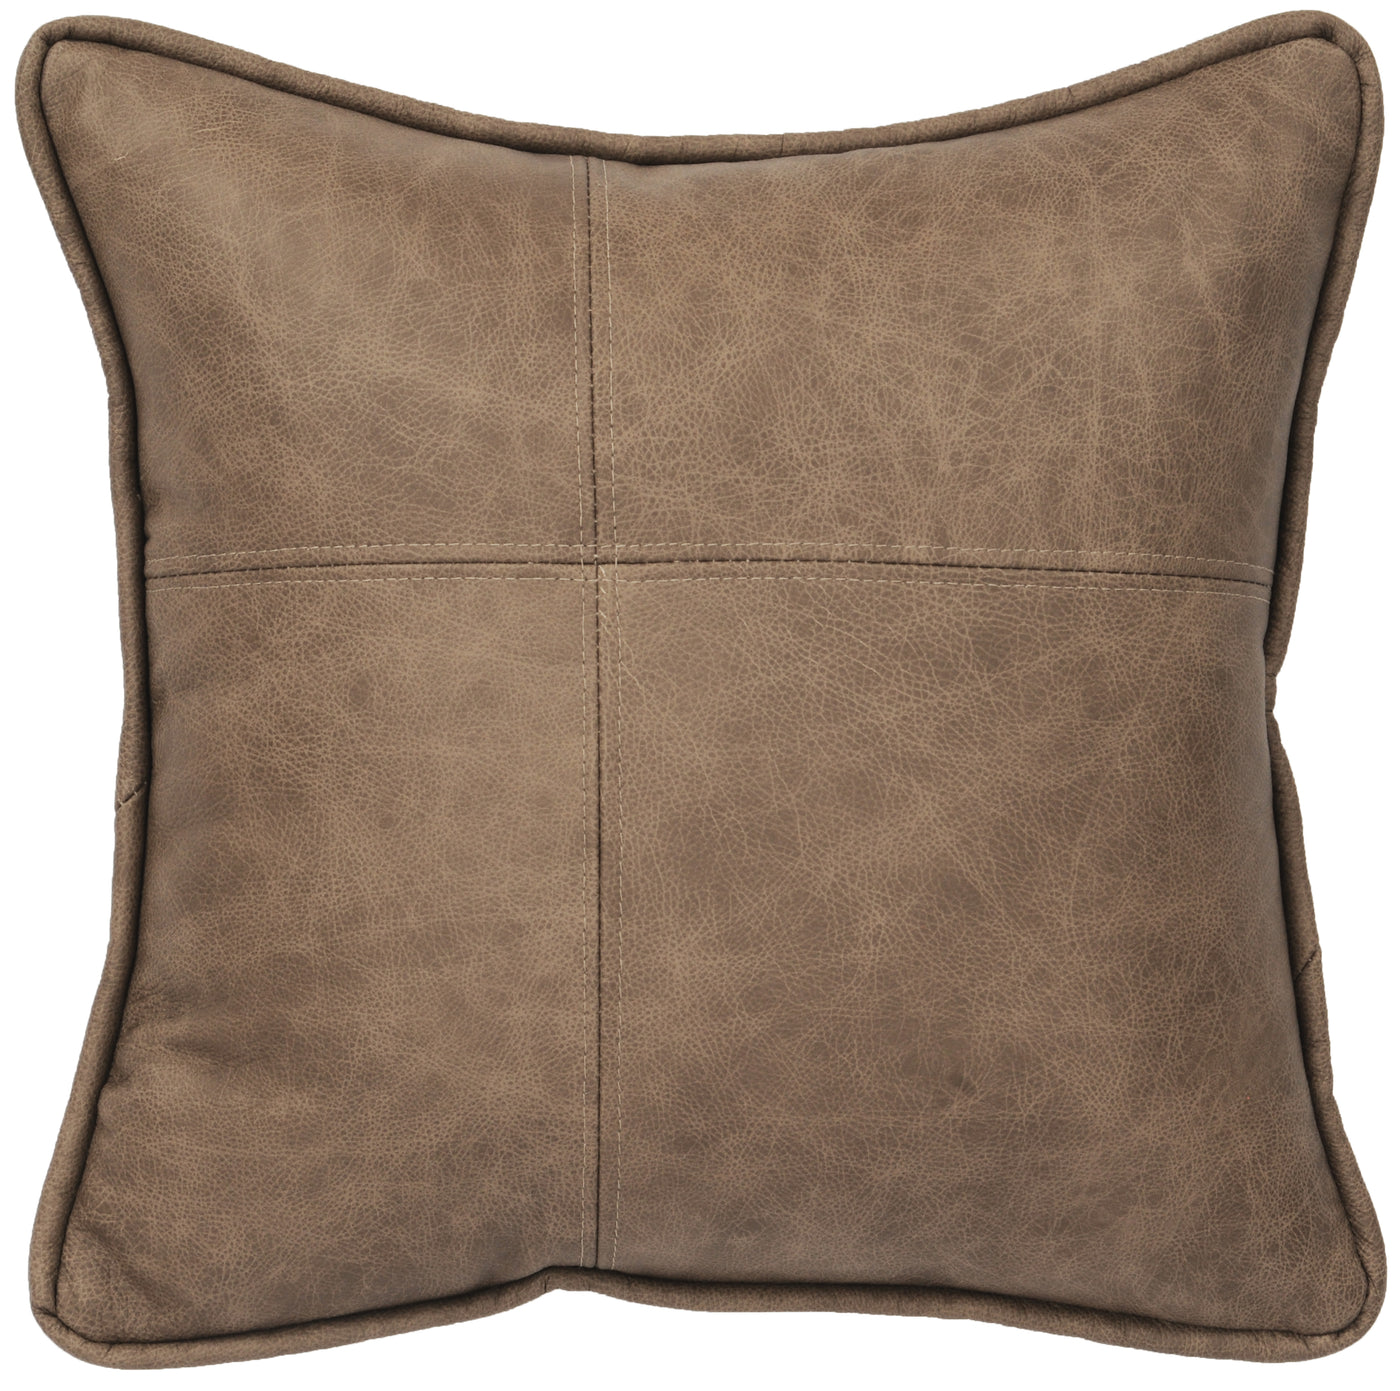 Canvello Mushroom Leather Button Pillow - Fabric Back - 16" x 16"